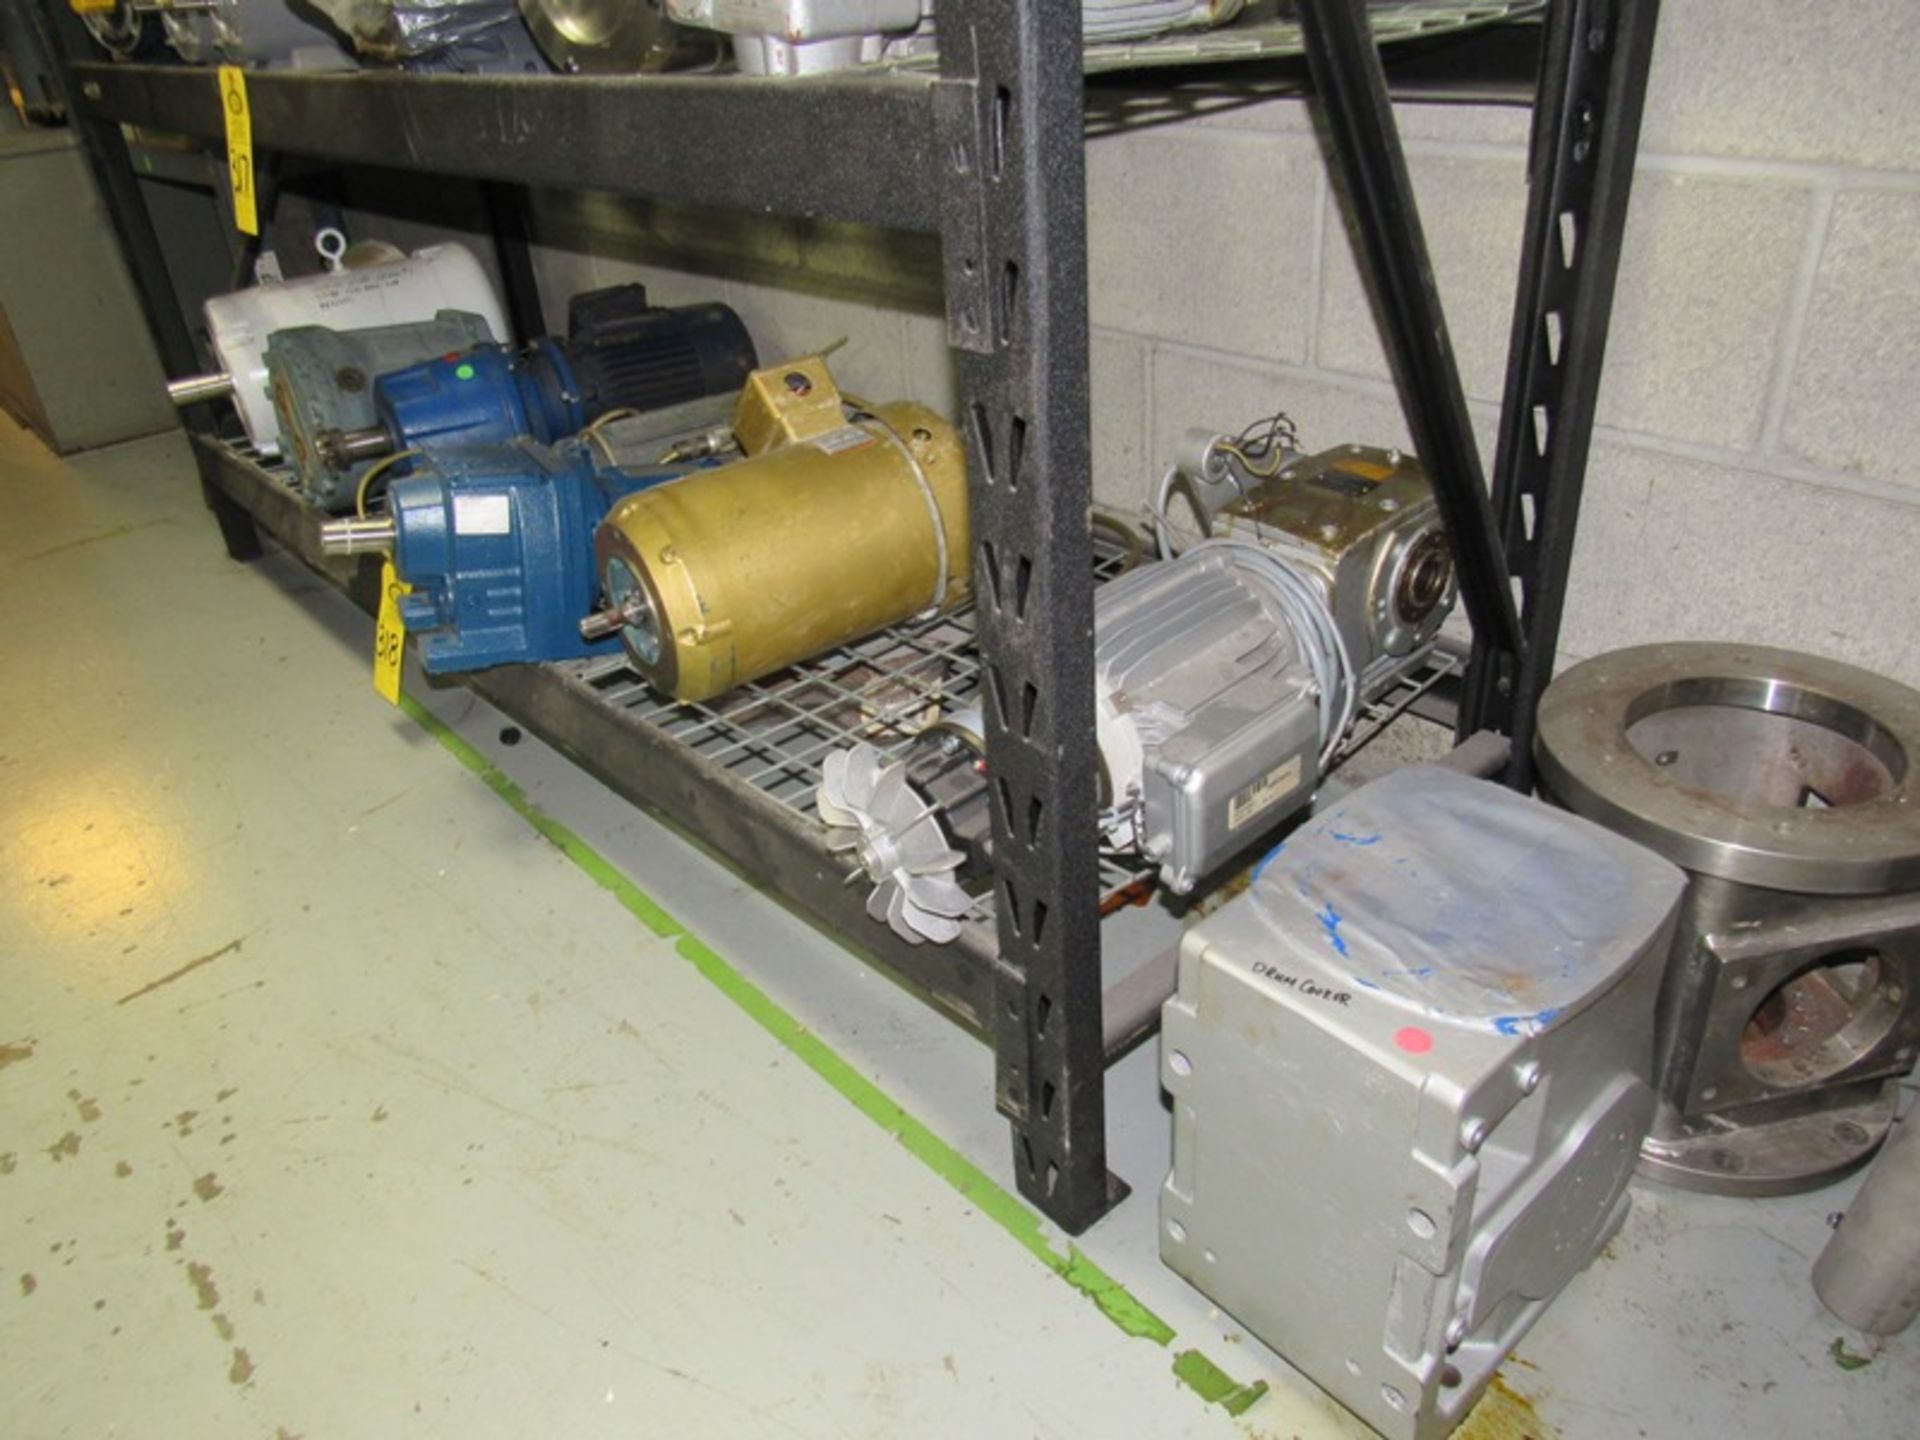 Lot (6) Misc. Electric Motors and Gearbox (Required Loading Fee $20.00 Norm Pavlish 402-540-8843